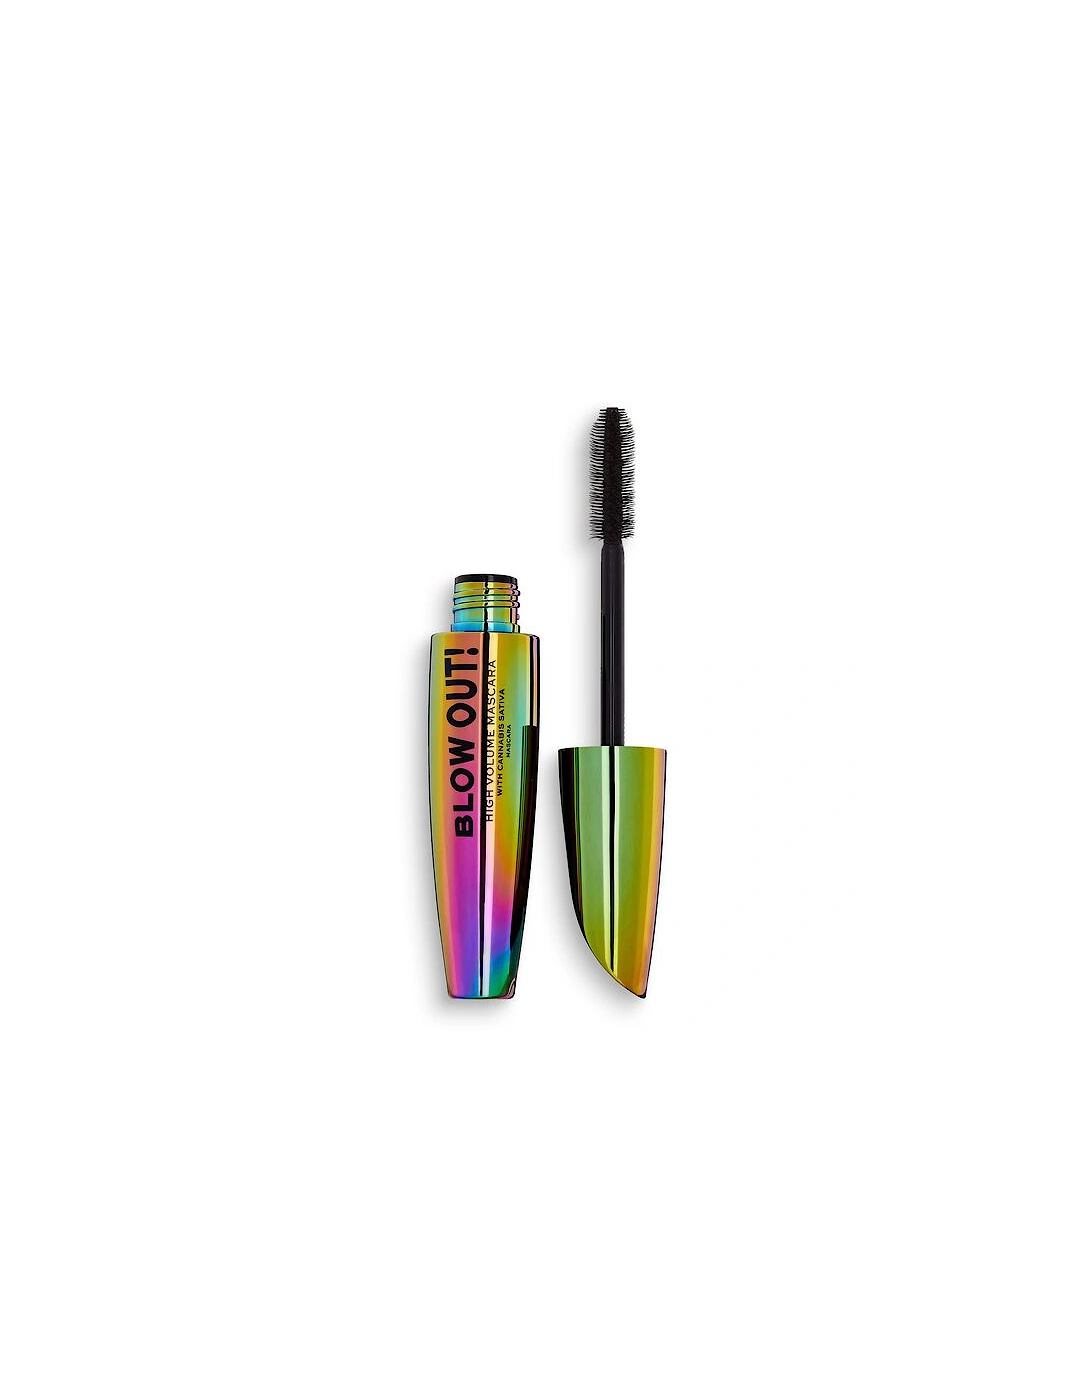 Blowout Mascara with cannabis sativa, 2 of 1